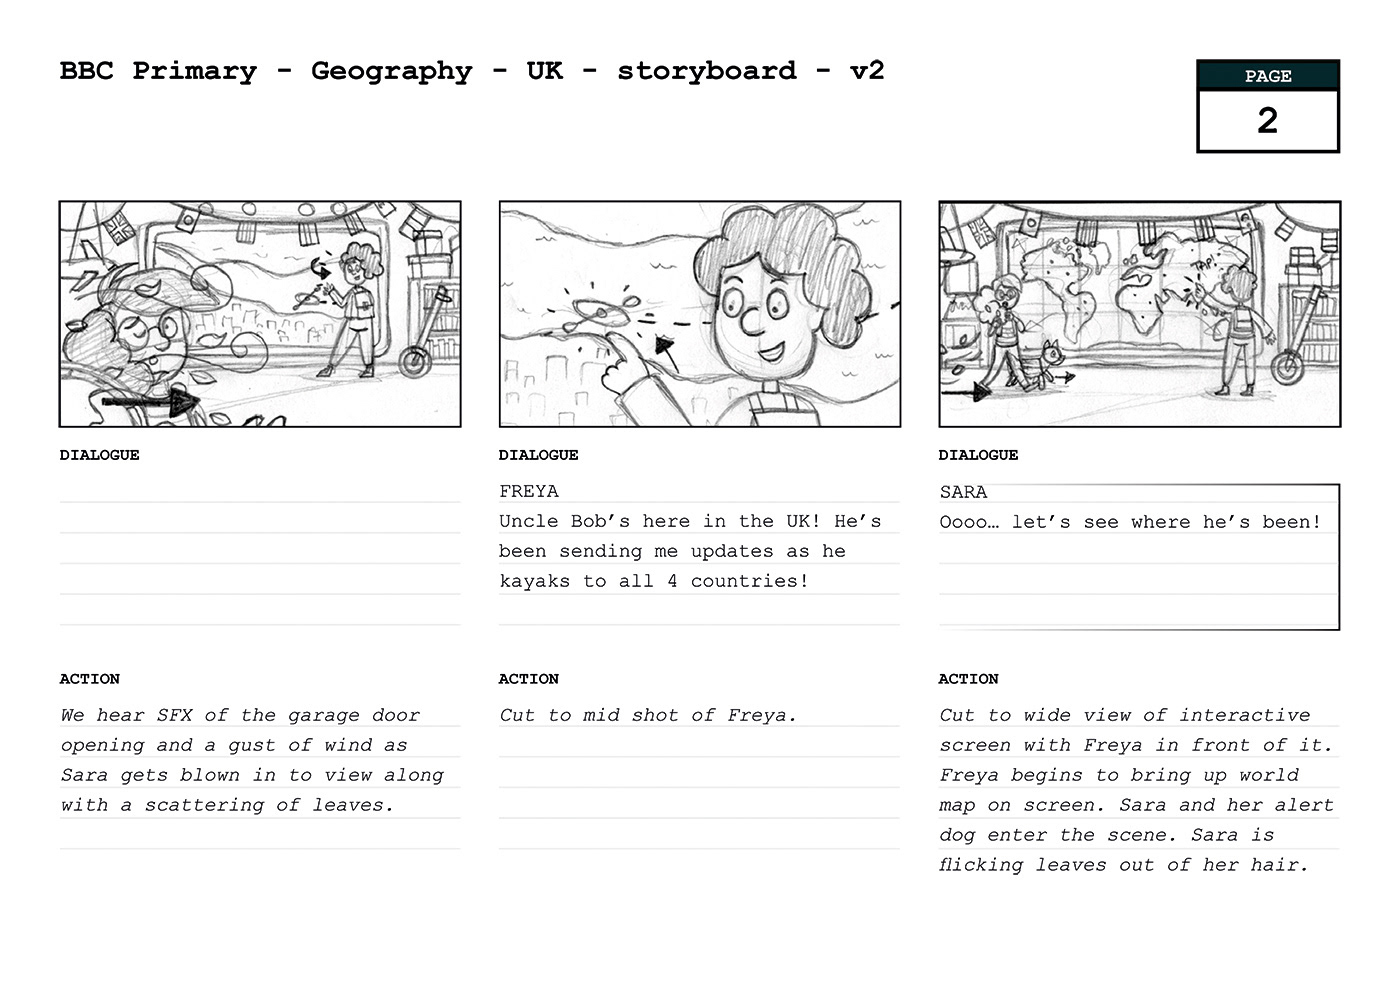 Sample storyboard page for a Geography animation.